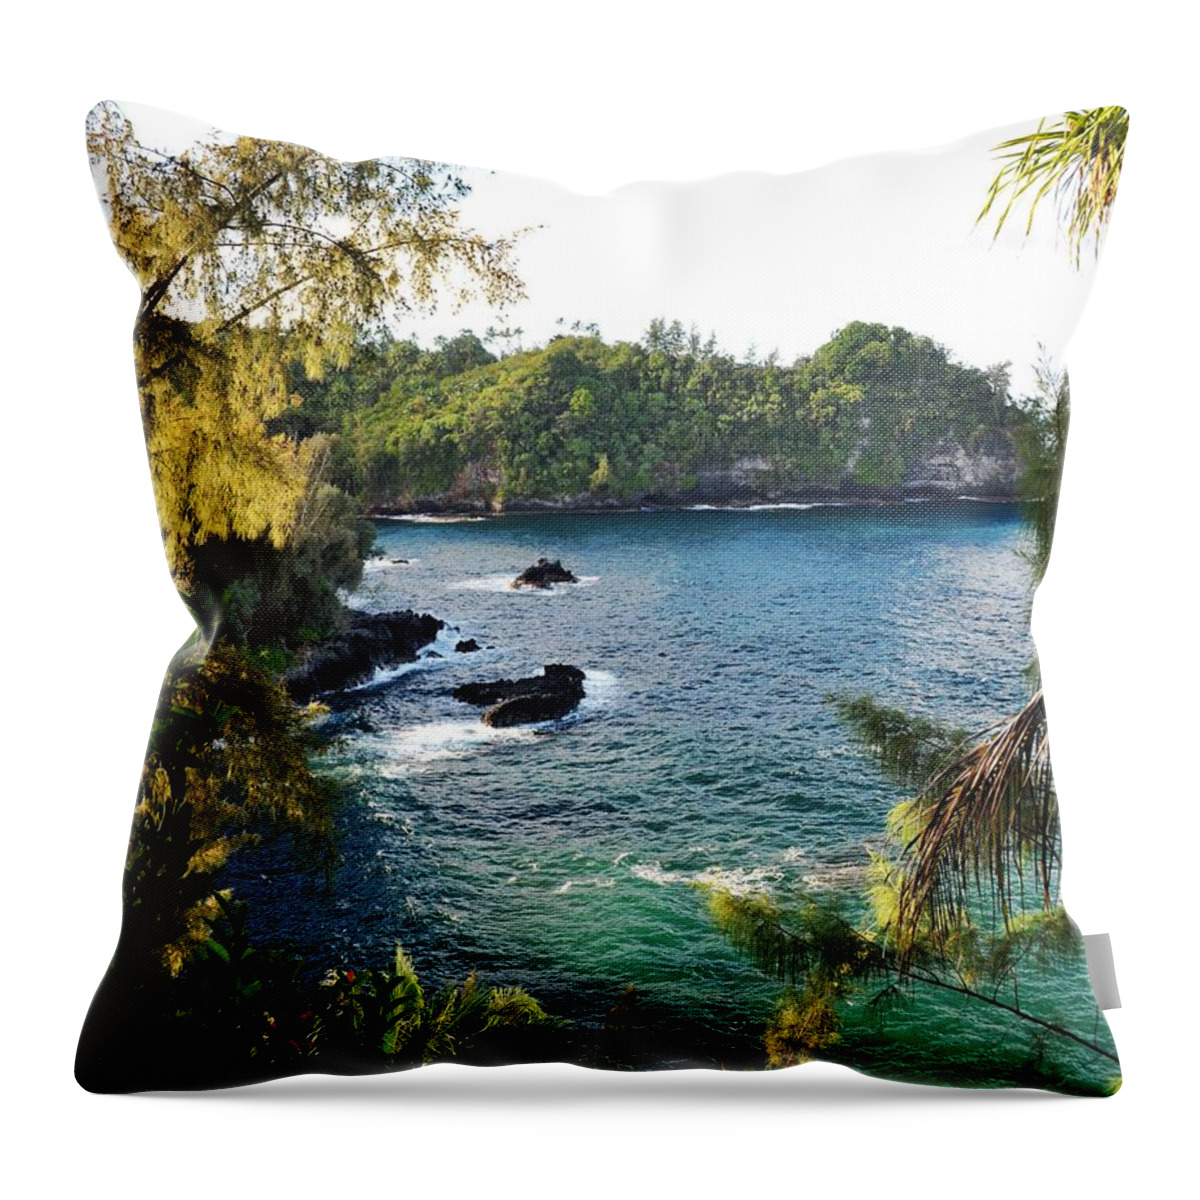 Ocean Images Throw Pillow featuring the photograph Onomea Bay Big Island Hawaii by Heidi Fickinger